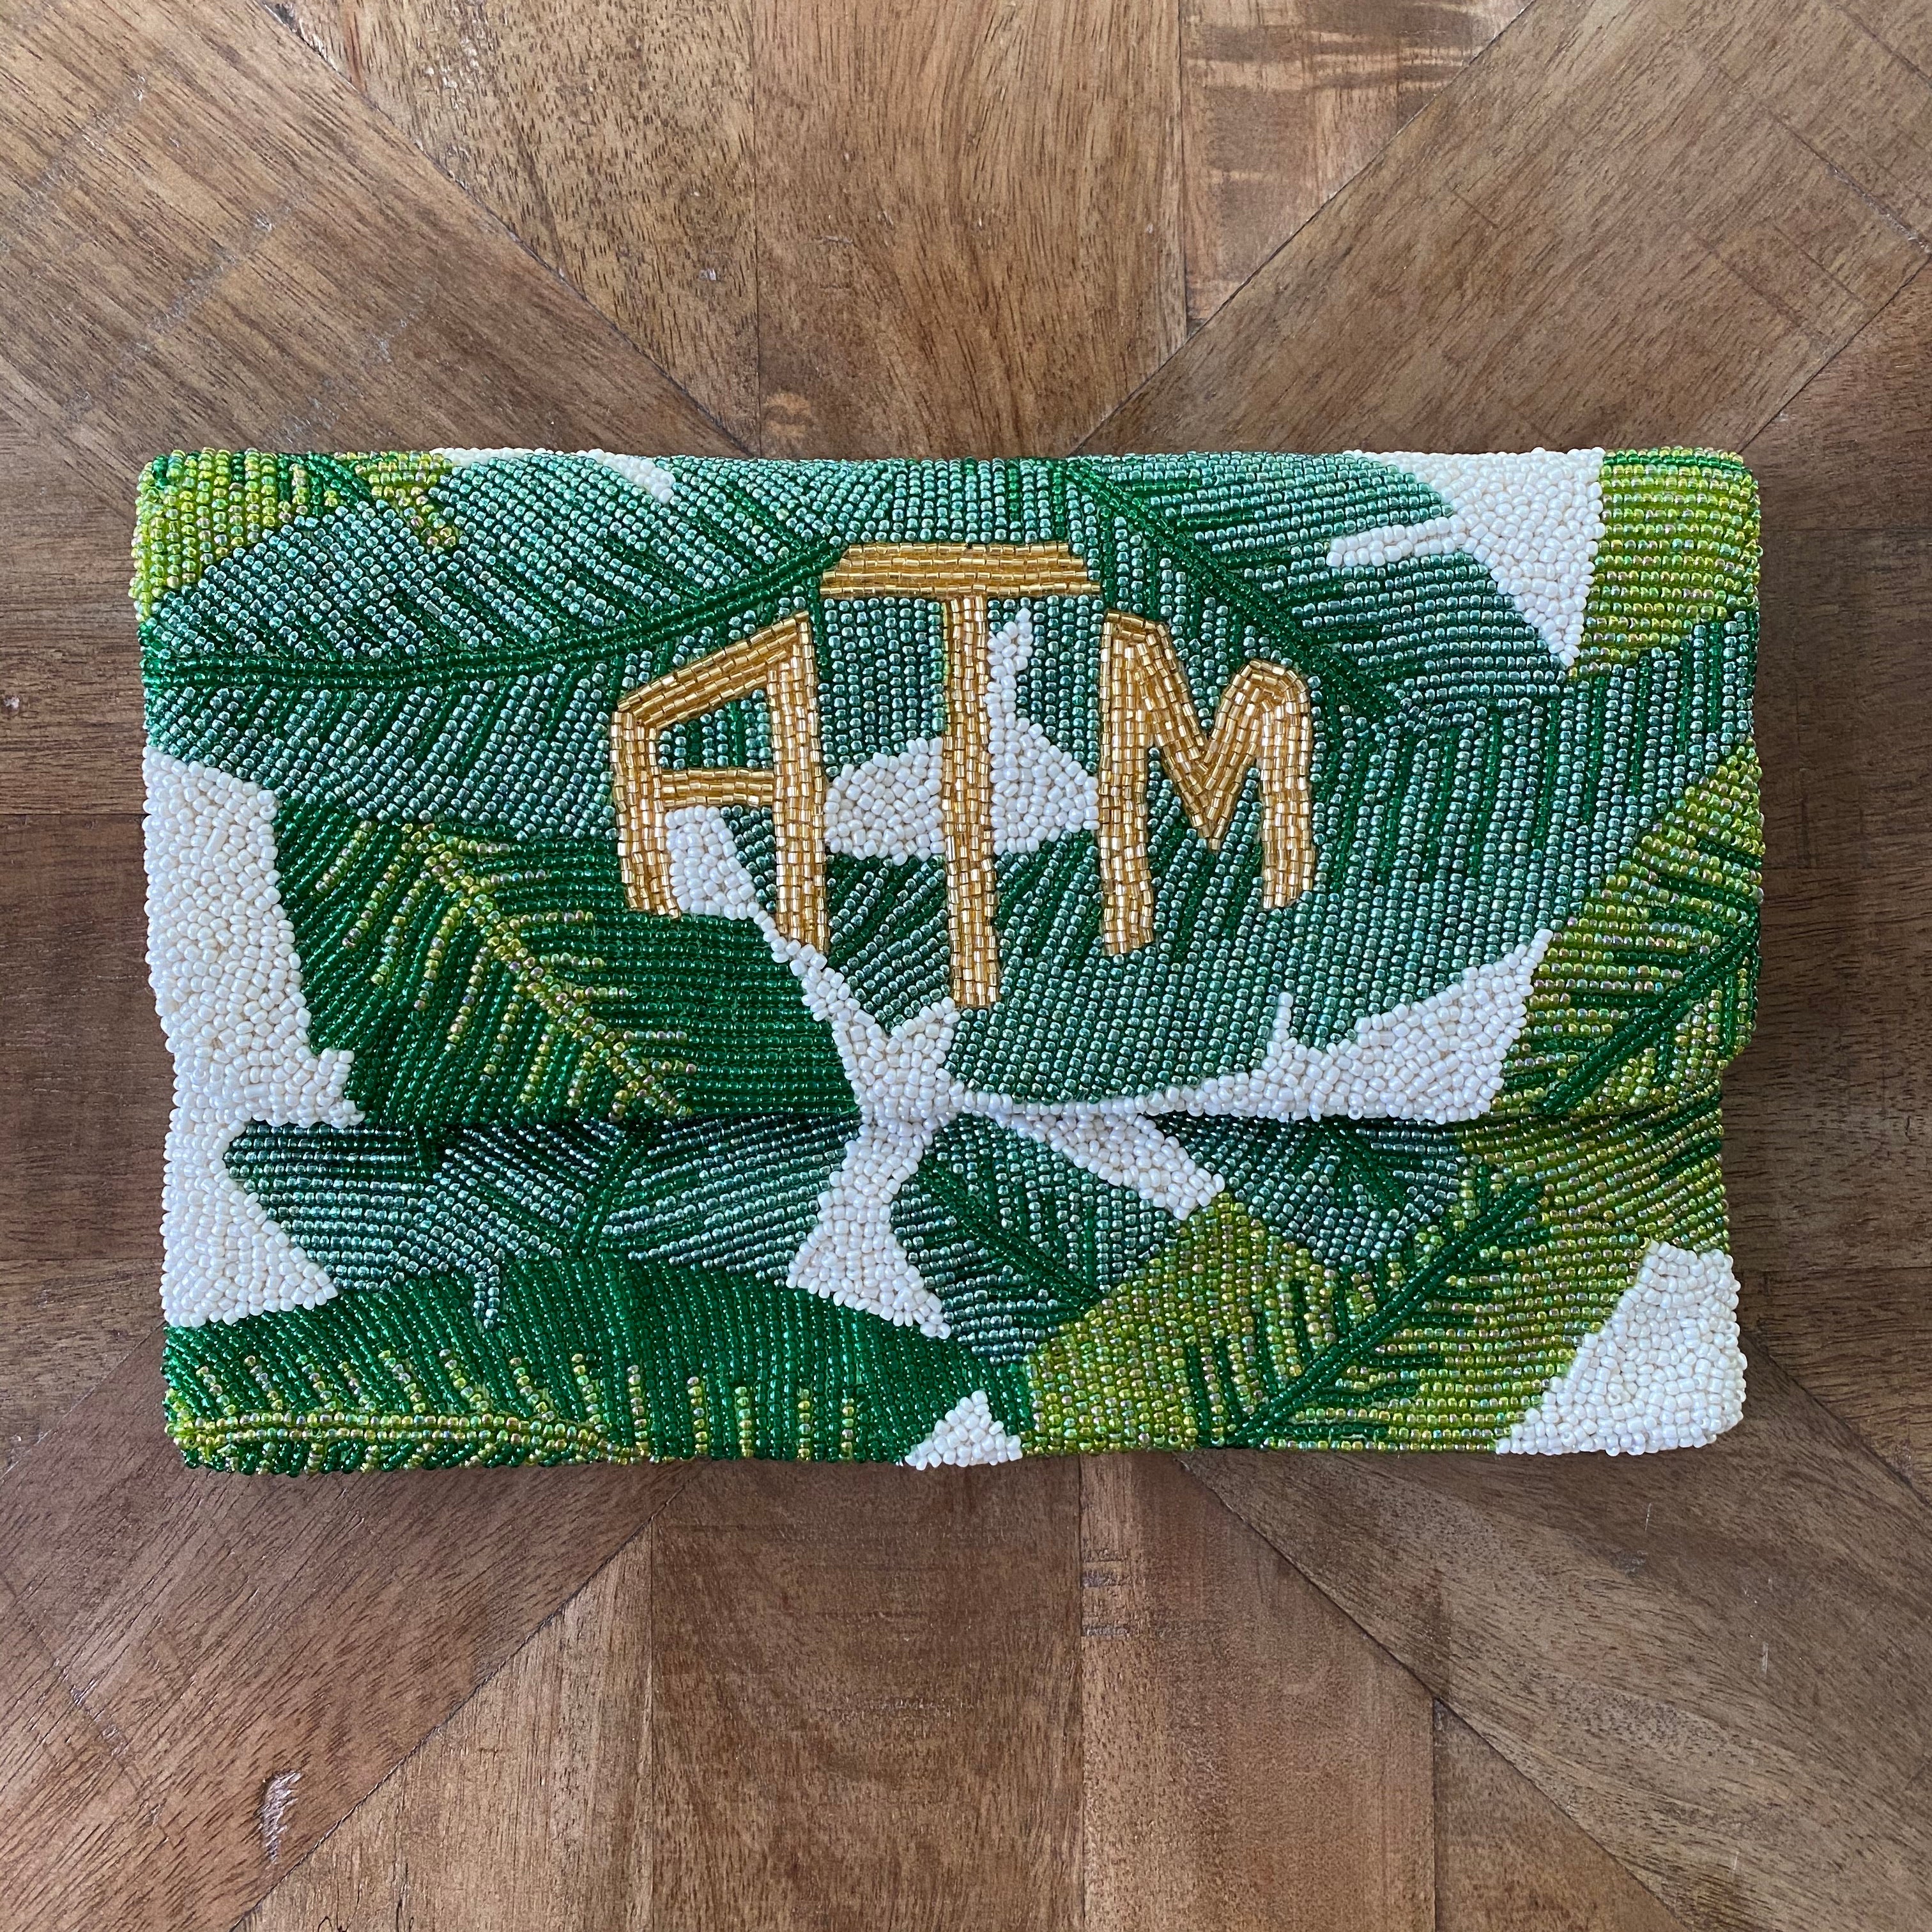 Custom Beaded Clutch - LARGER SIZE